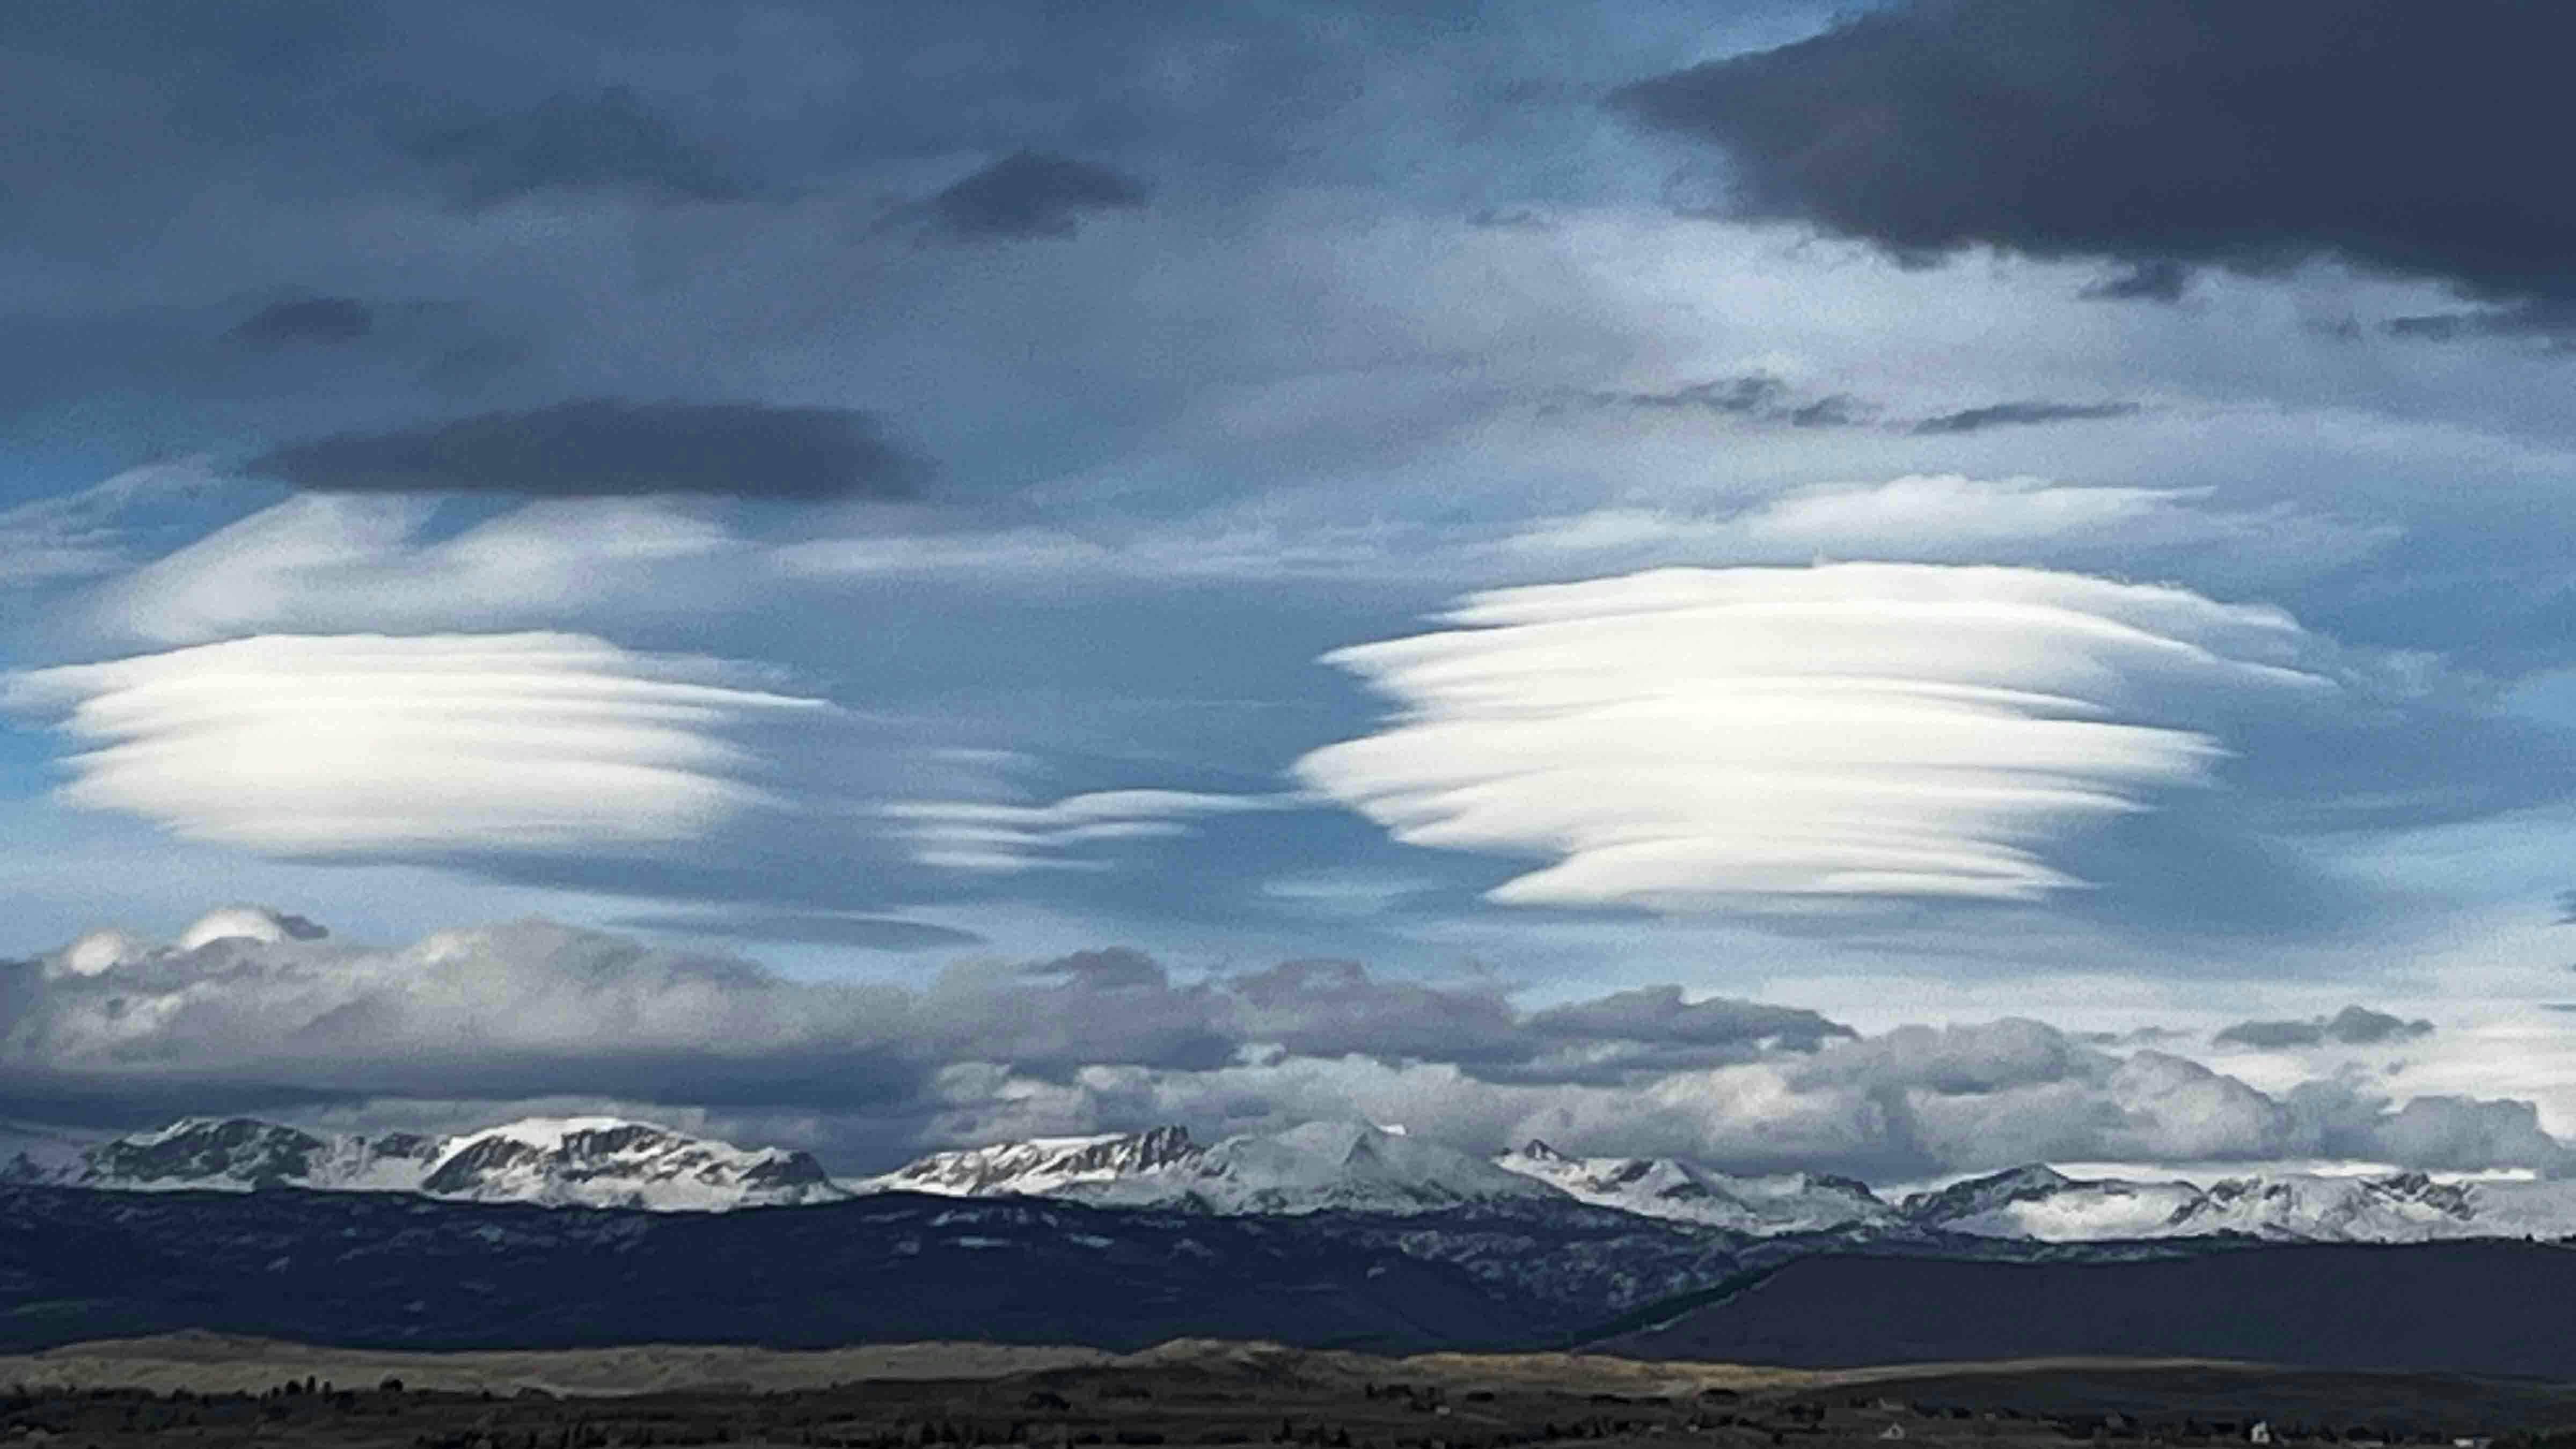 "Lenticular clouds that quickly formed then dissipated just as fast over Wind River mountains just after 7 PM on Tuesday, 4/16/24"